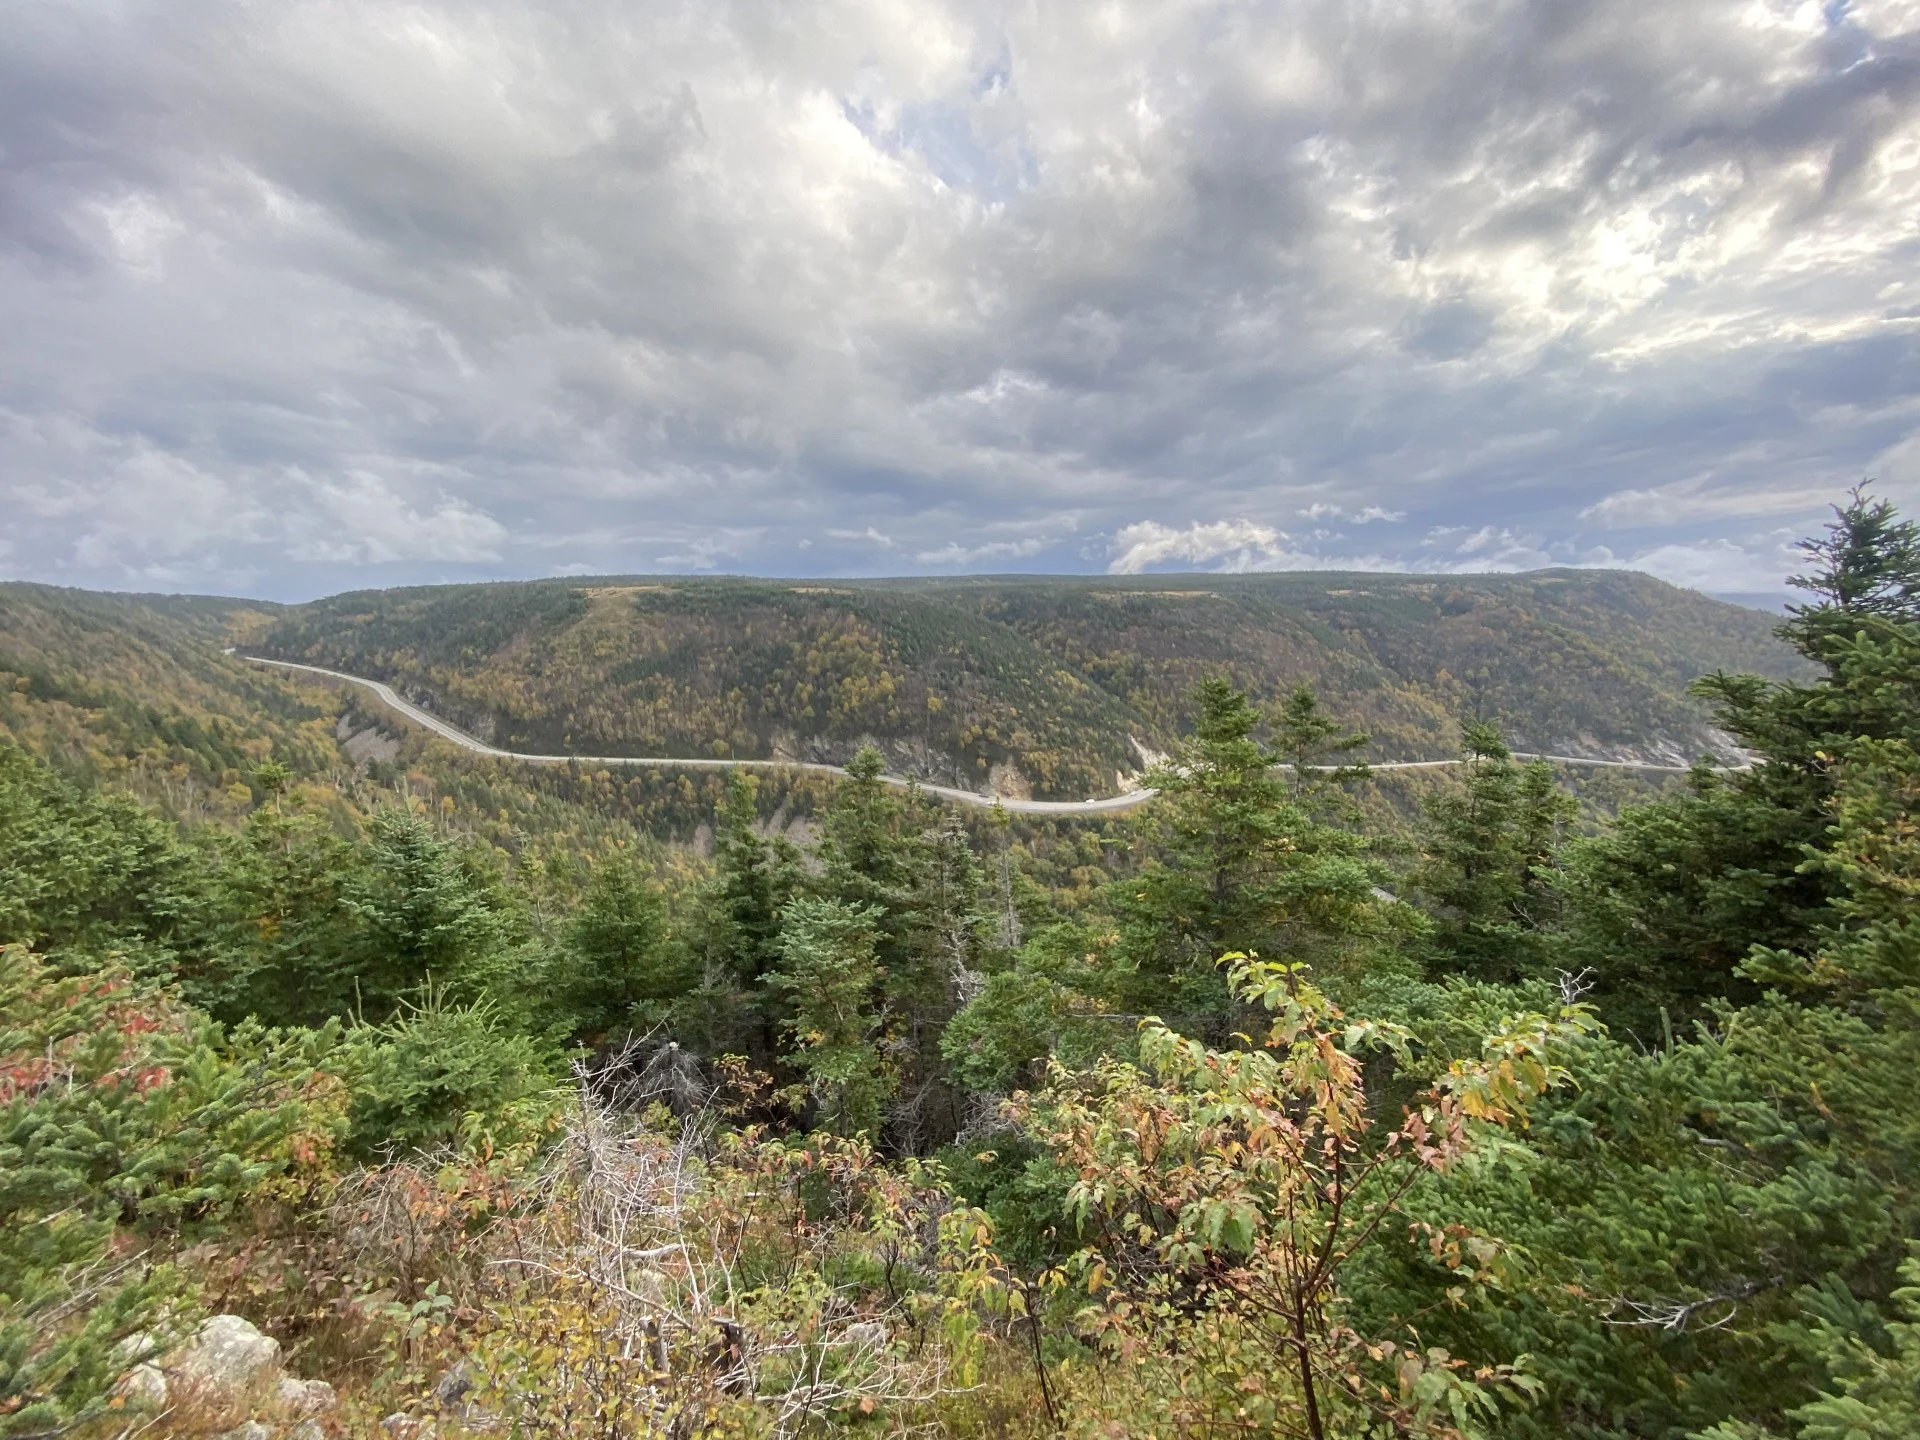 This Nova Scotia trail offers some of the best views to take in fall colours